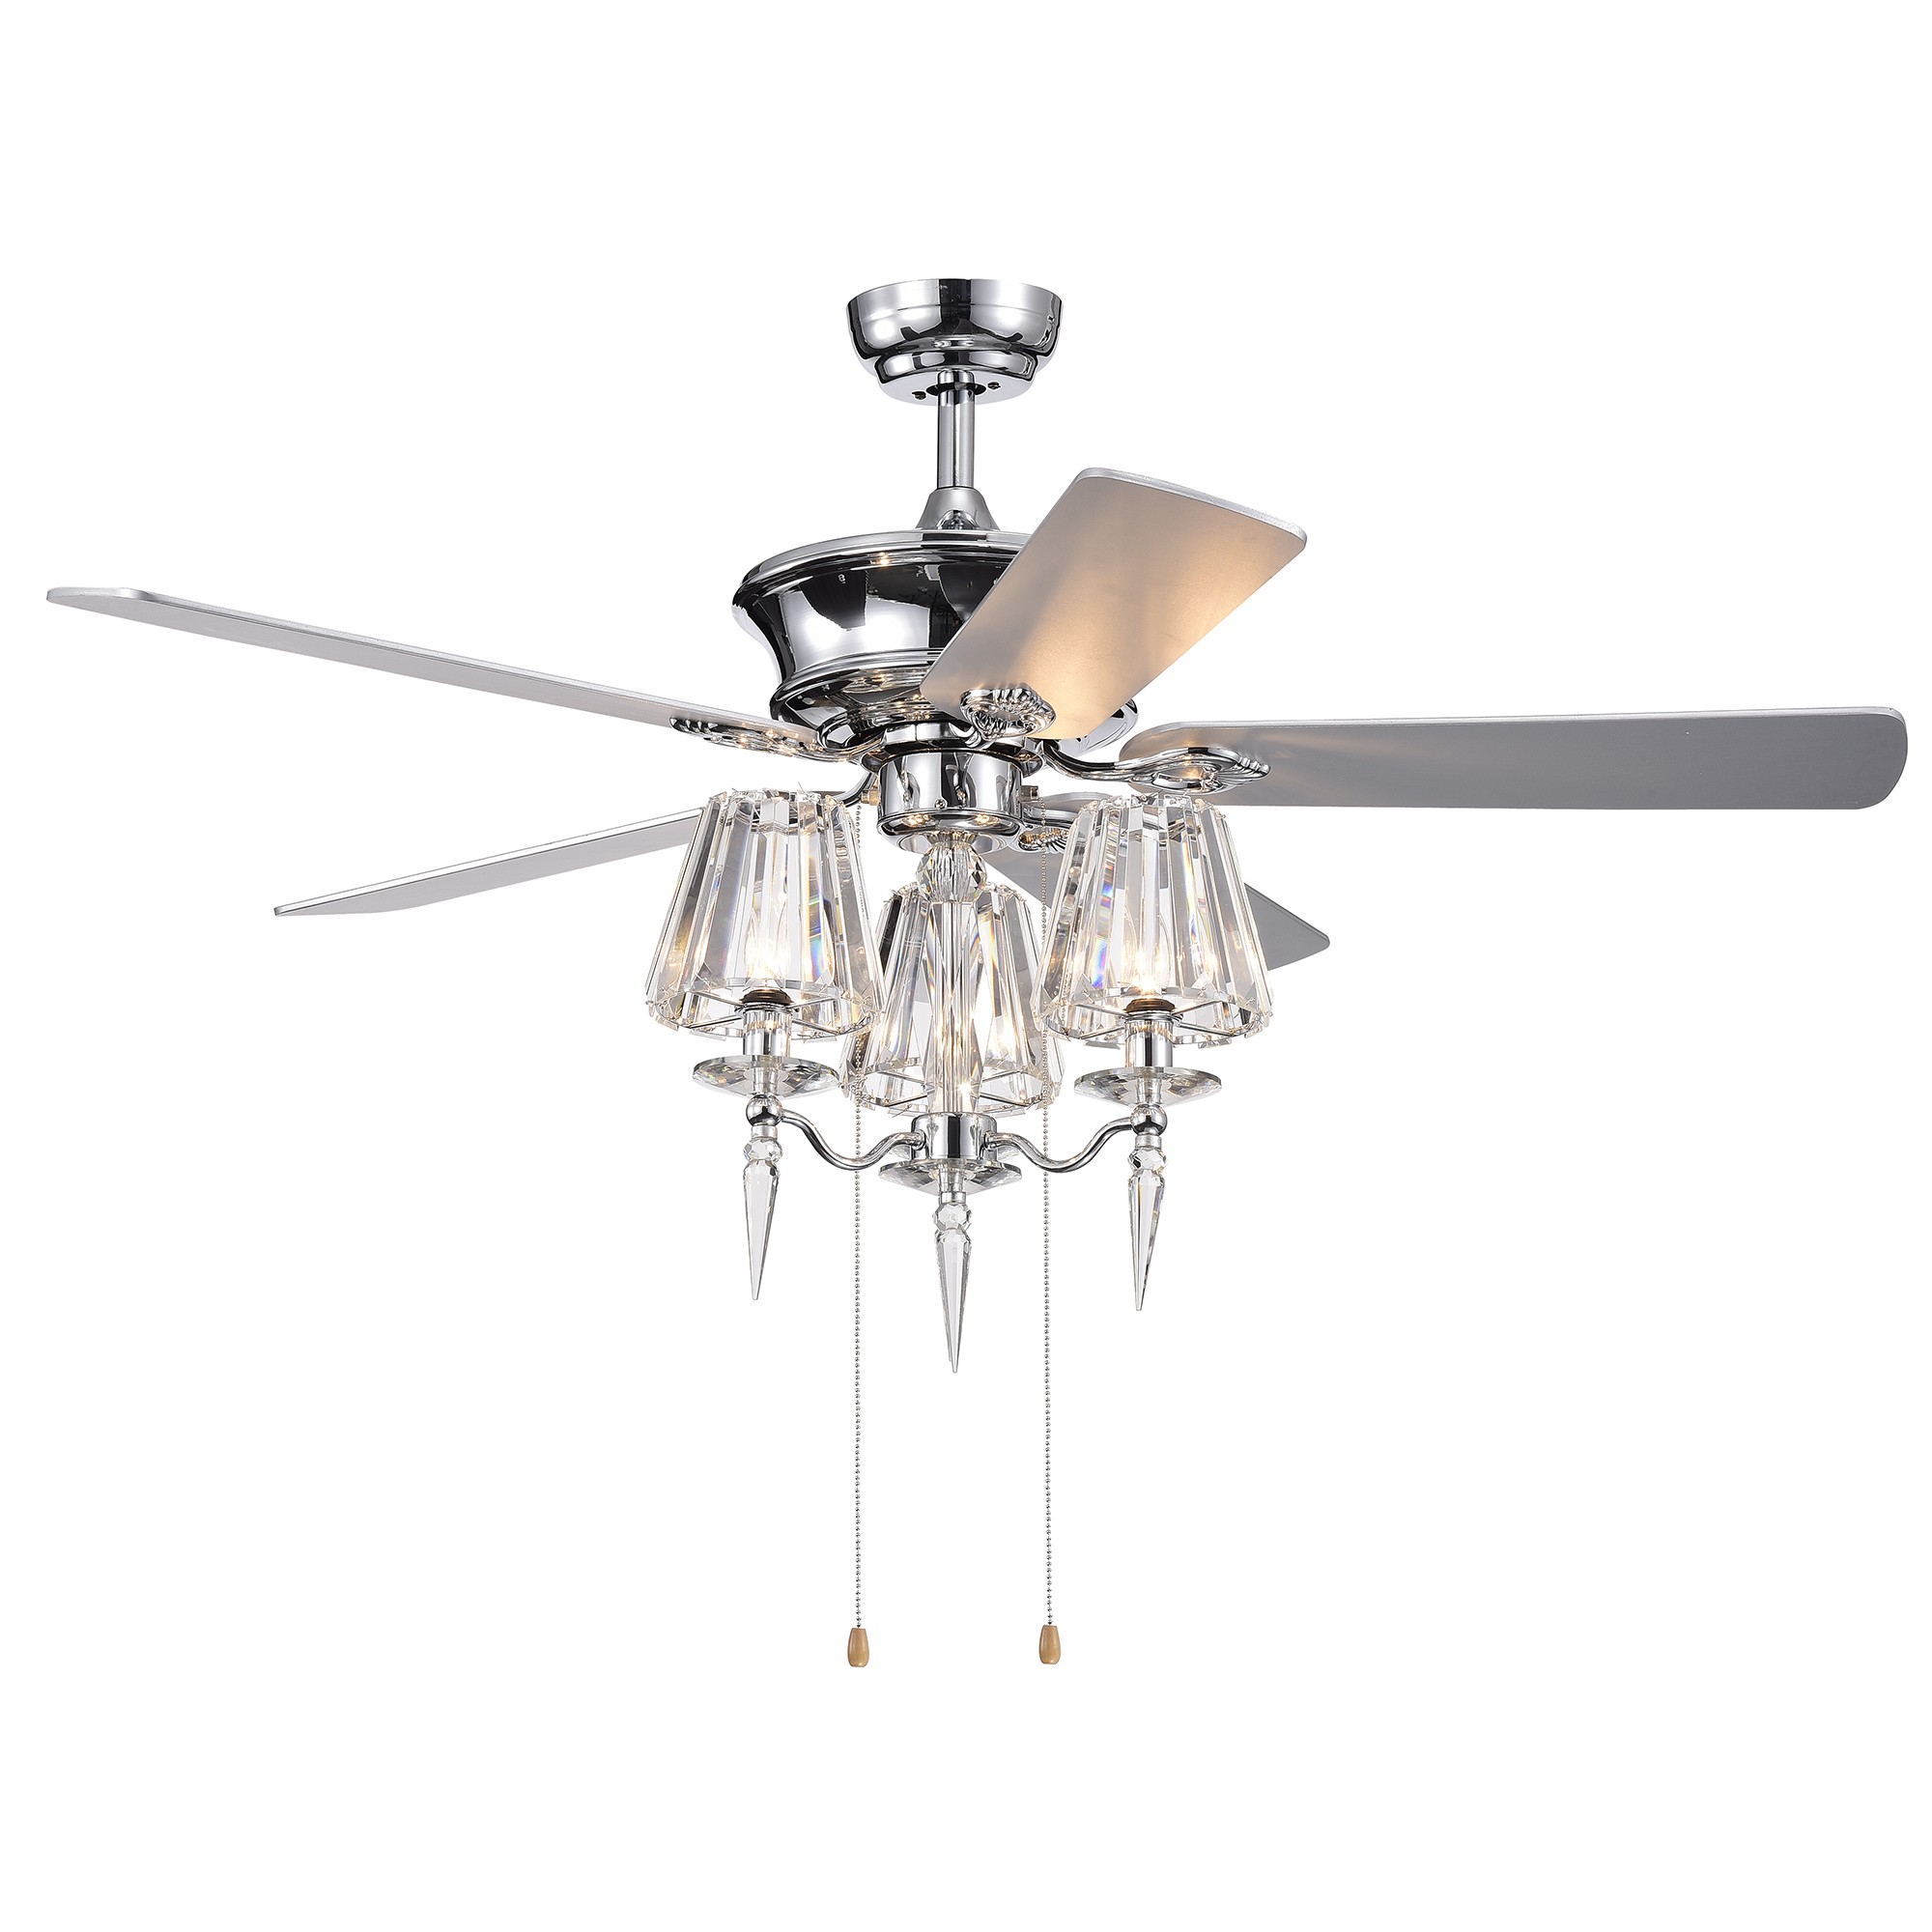 Onwen 52-inch 5-blade Chrome Lighted Ceilng Fans with Crystal Lamps (optional remote)